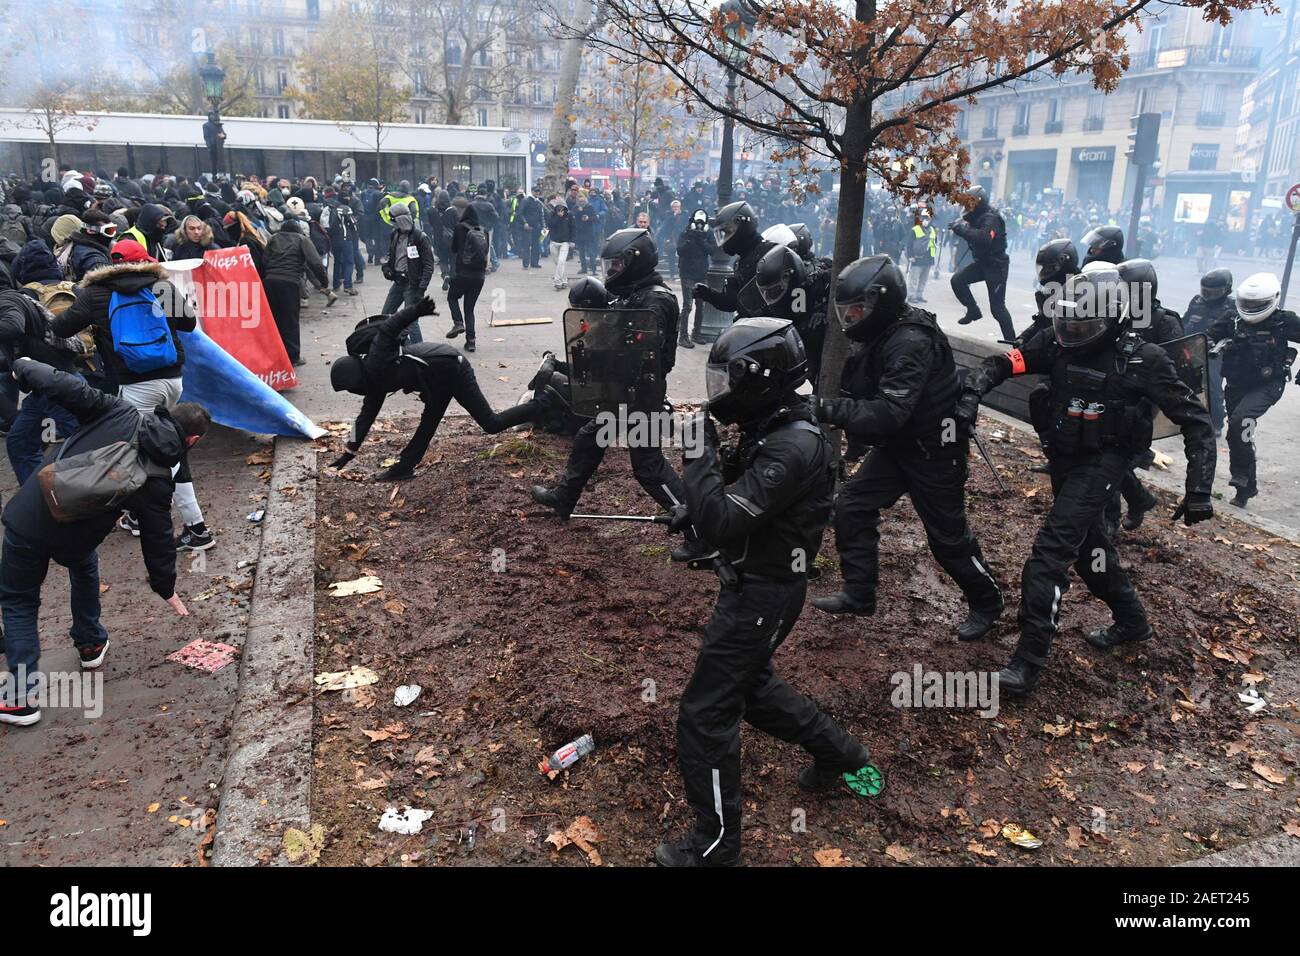 *** STRICTLY NO SALES TO FRENCH MEDIA OR PUBLISHERS *** December 05, 2019 - Paris, France: French police clash with anti-government protesters ahead of a demonstration against the President Emmanuel Macron's pension reform plan. Tens of thousands of people marched in Paris to voice their opposition to the government's project. Stock Photo